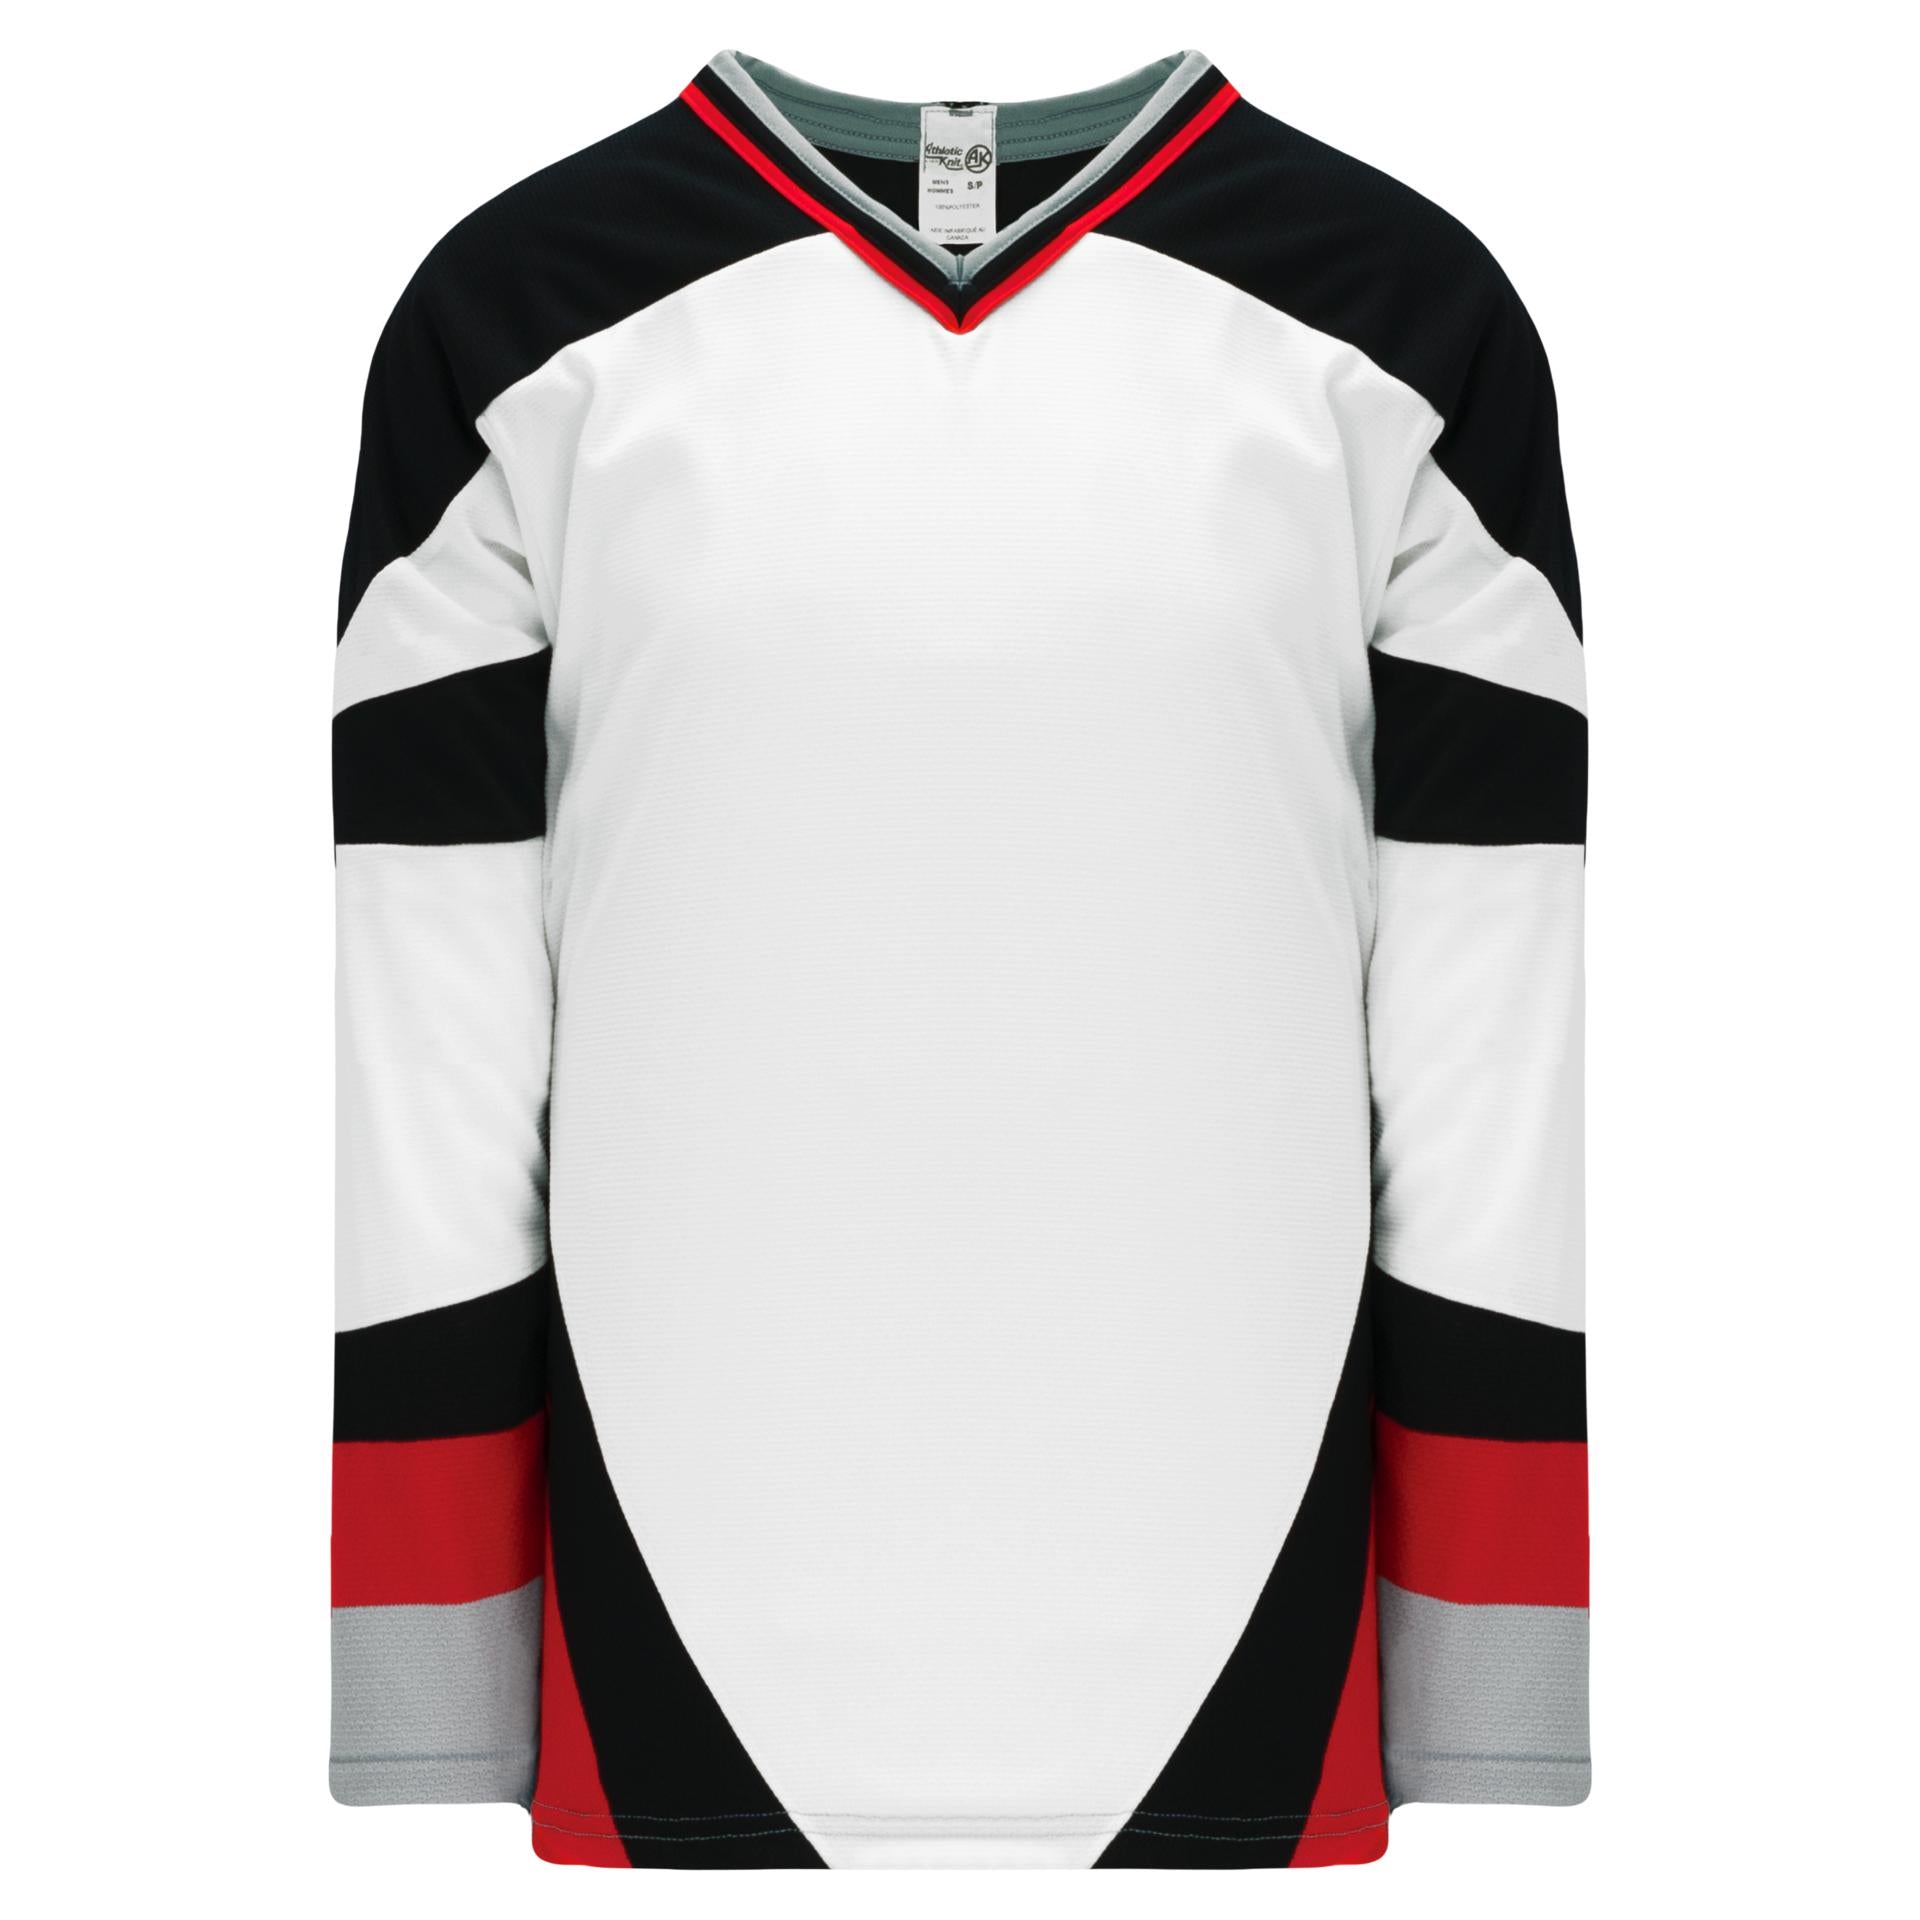 Miss the Sabres black and red jerseys. : r/nhl